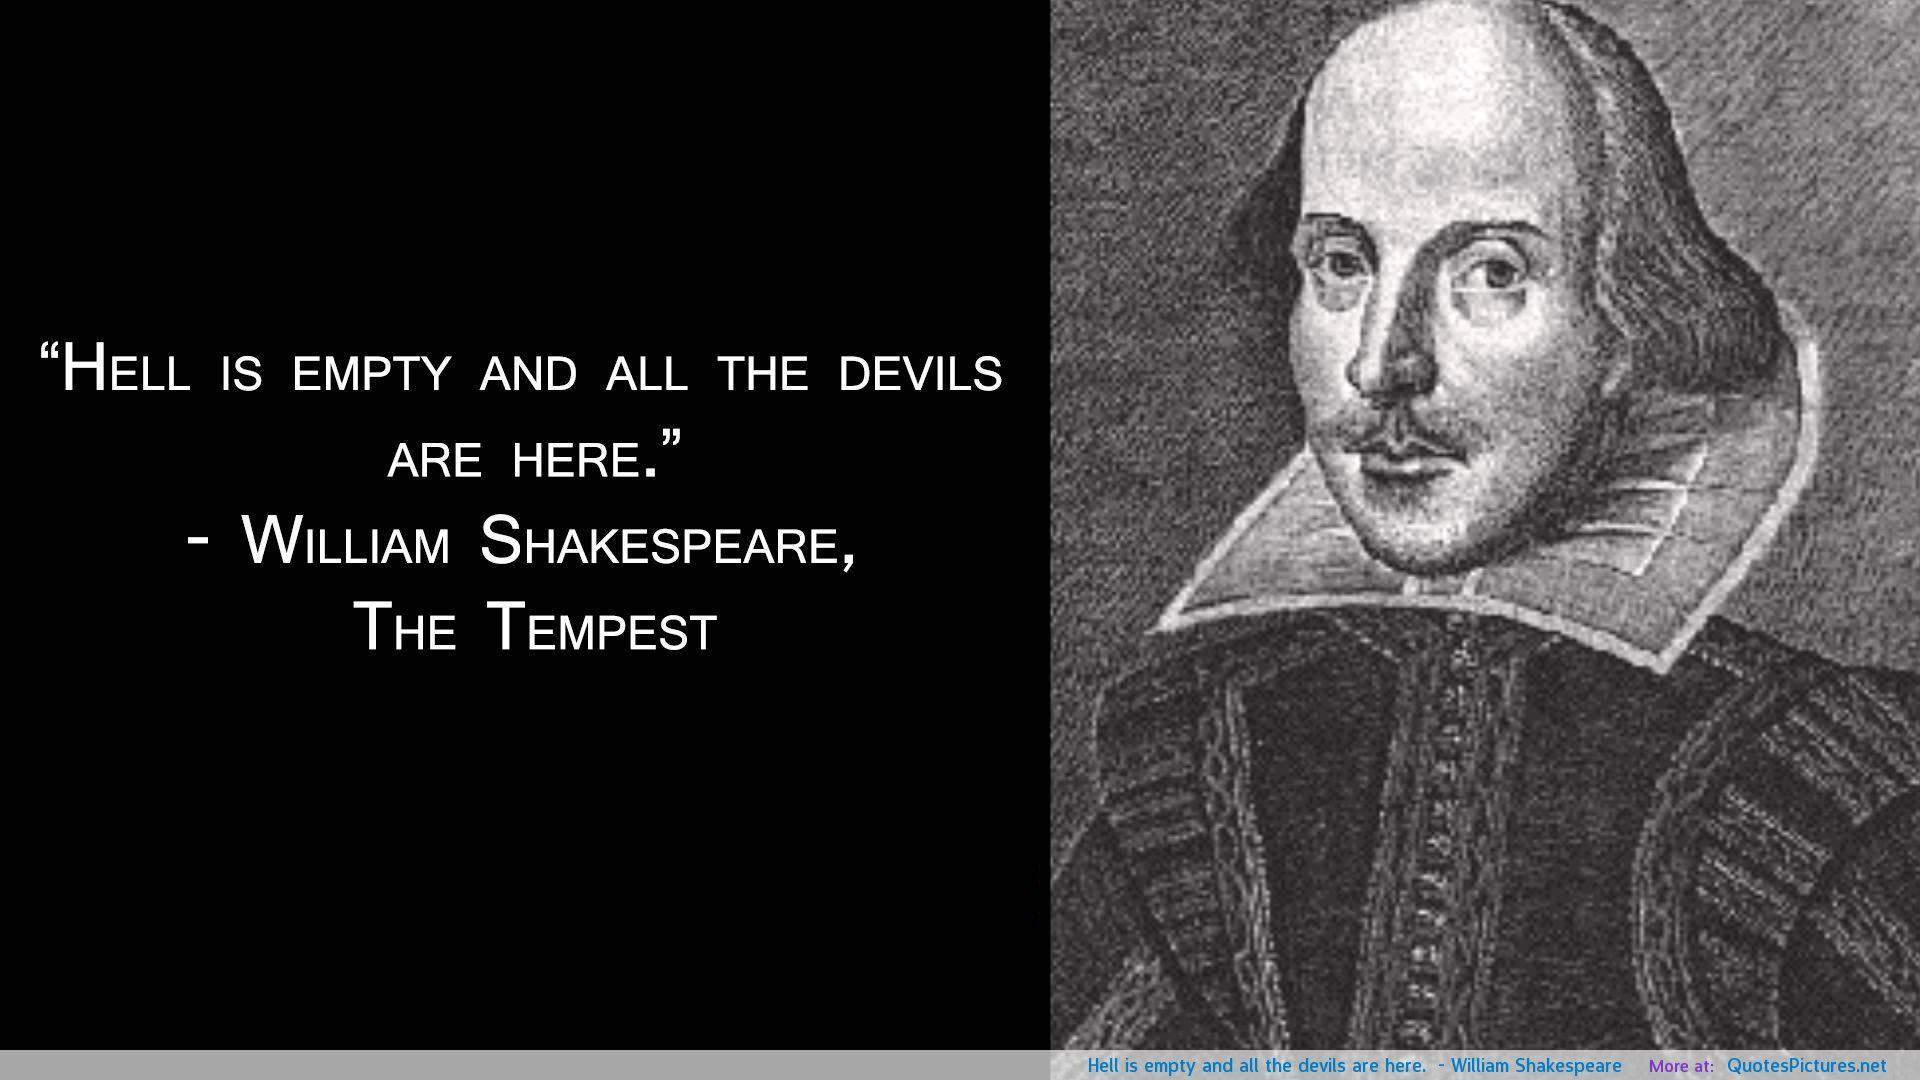 Gallery of Shakespeare illustrations, from celebrated works of art . !lhr.  i^,>S /j//,iU/.-. Brc^rrn- ,{• OoupU /t C. Par-ts m so m<a C 49 89 n.  ^ ?• 4^^ o^ Stock Photo -